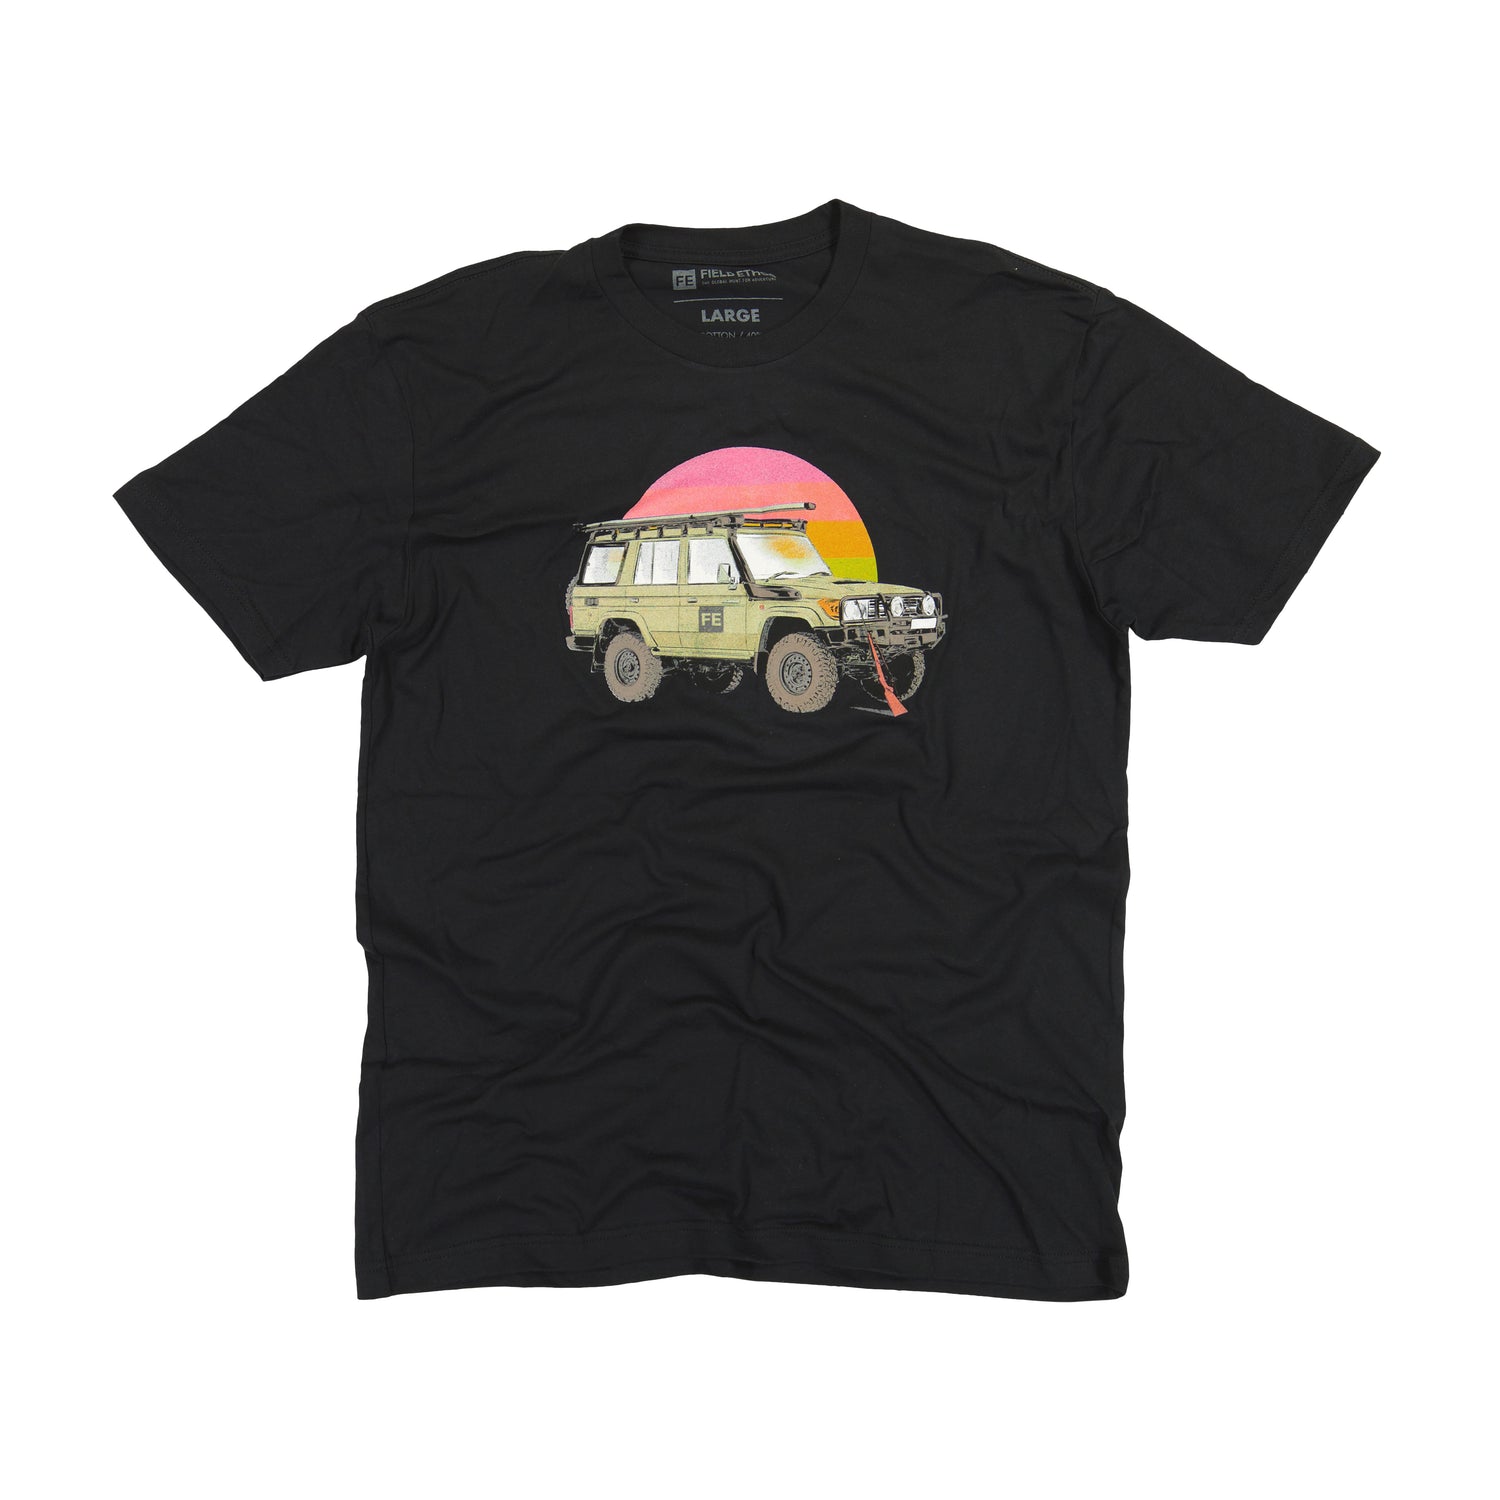 Outrider Cotton T-Shirt